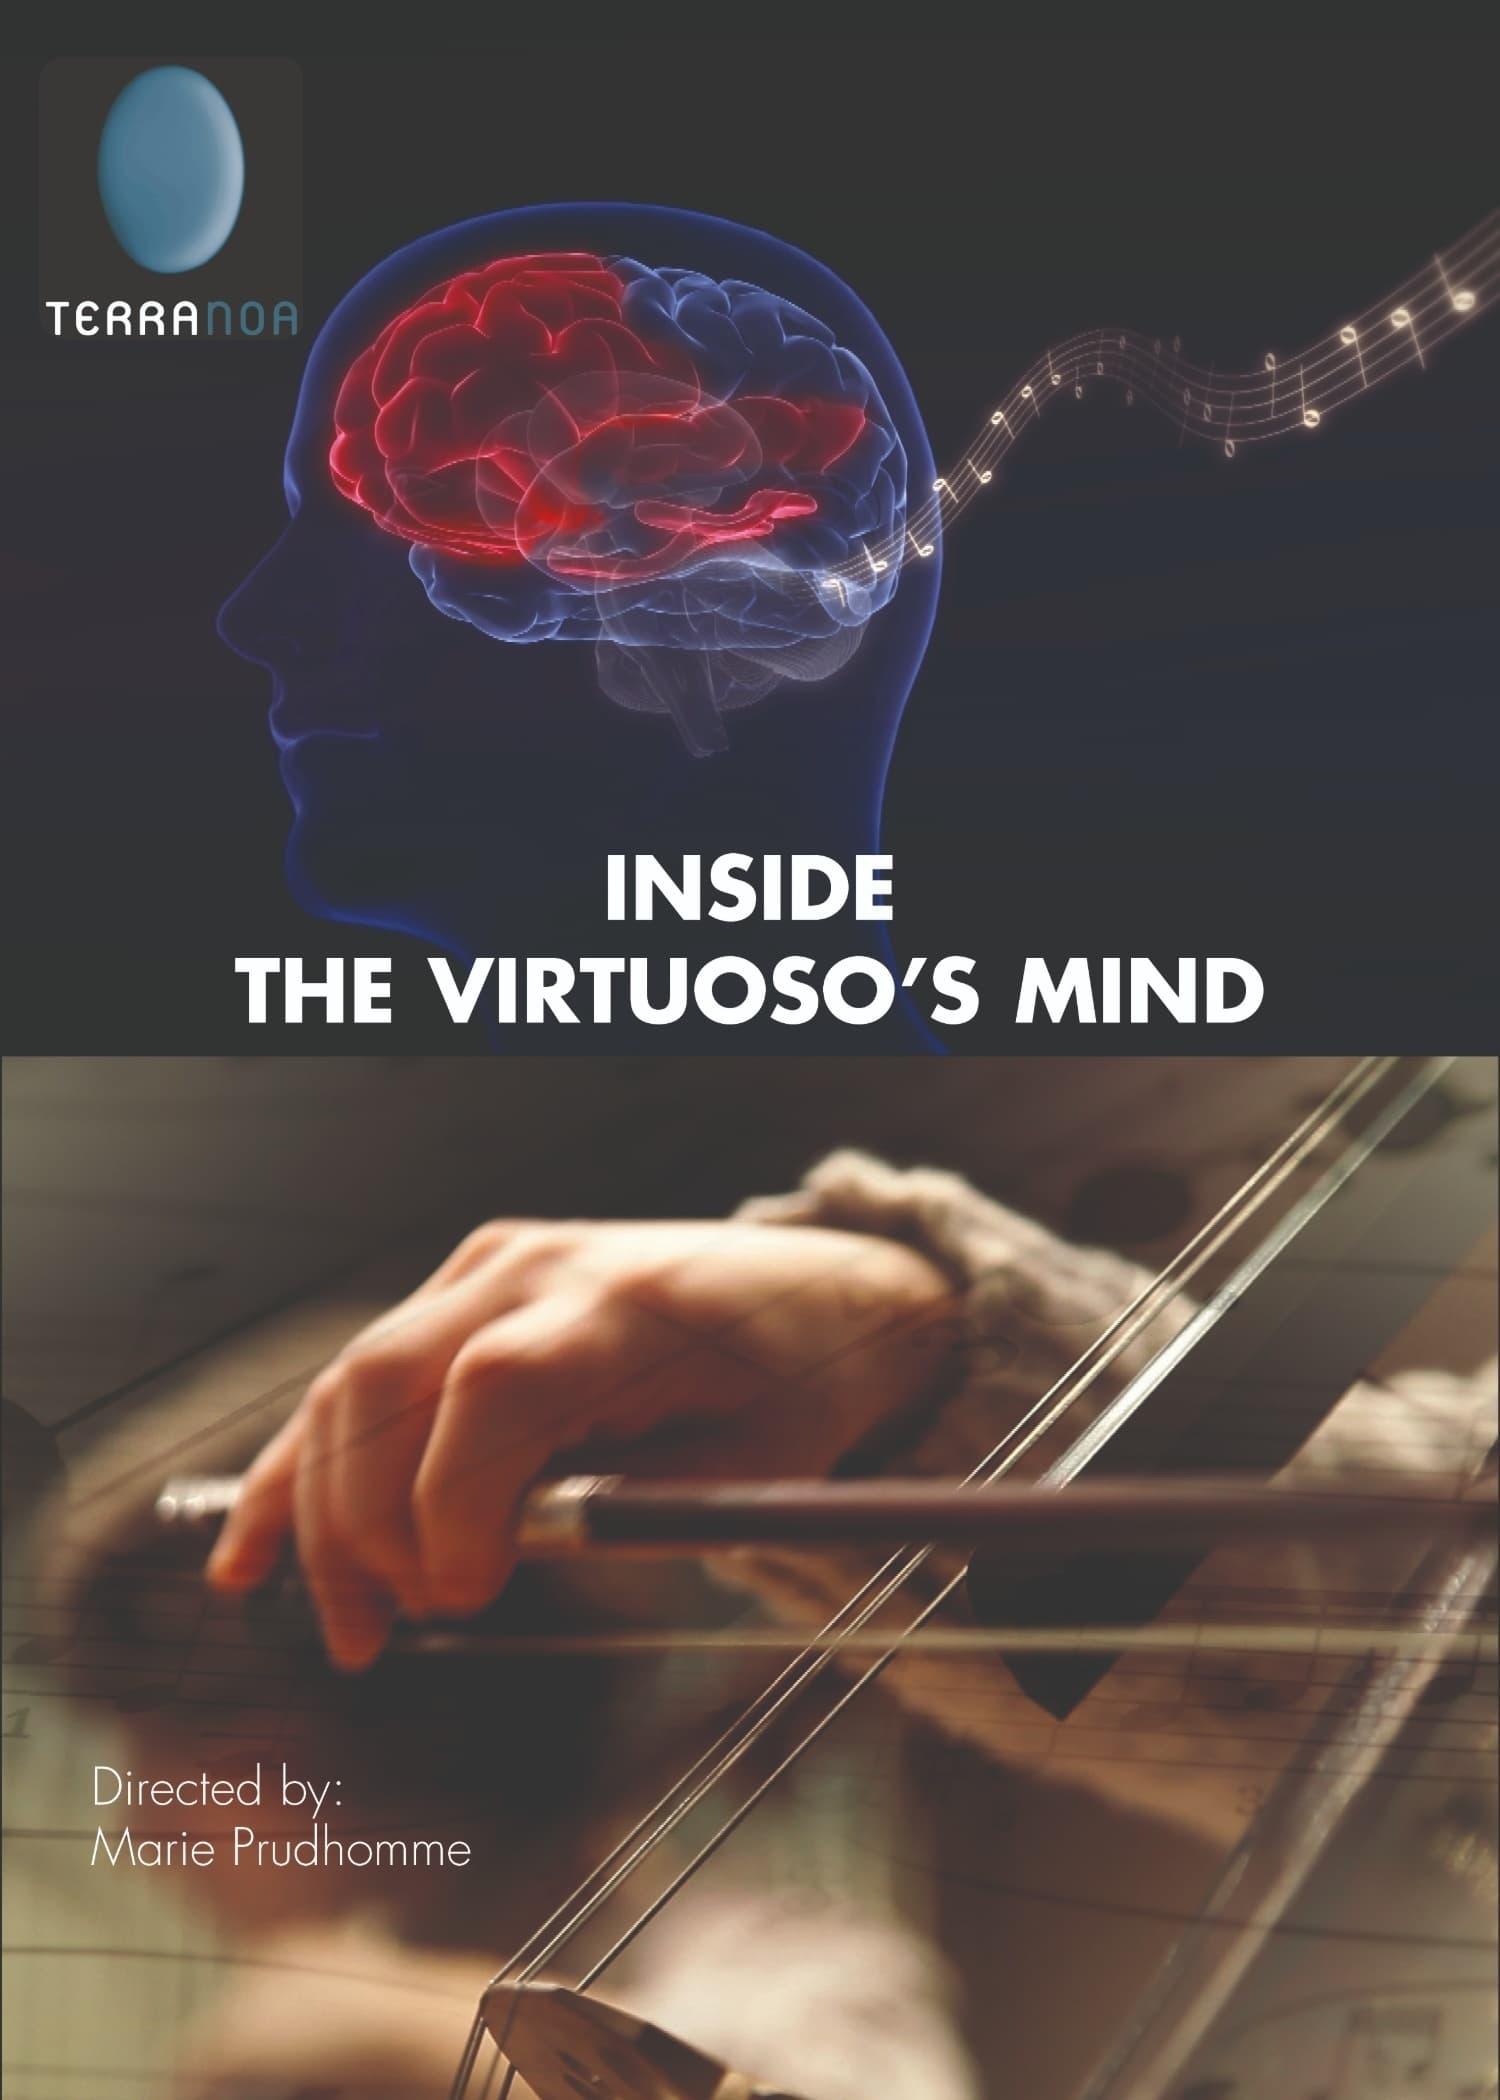 Inside The Virtuoso’s Mind poster